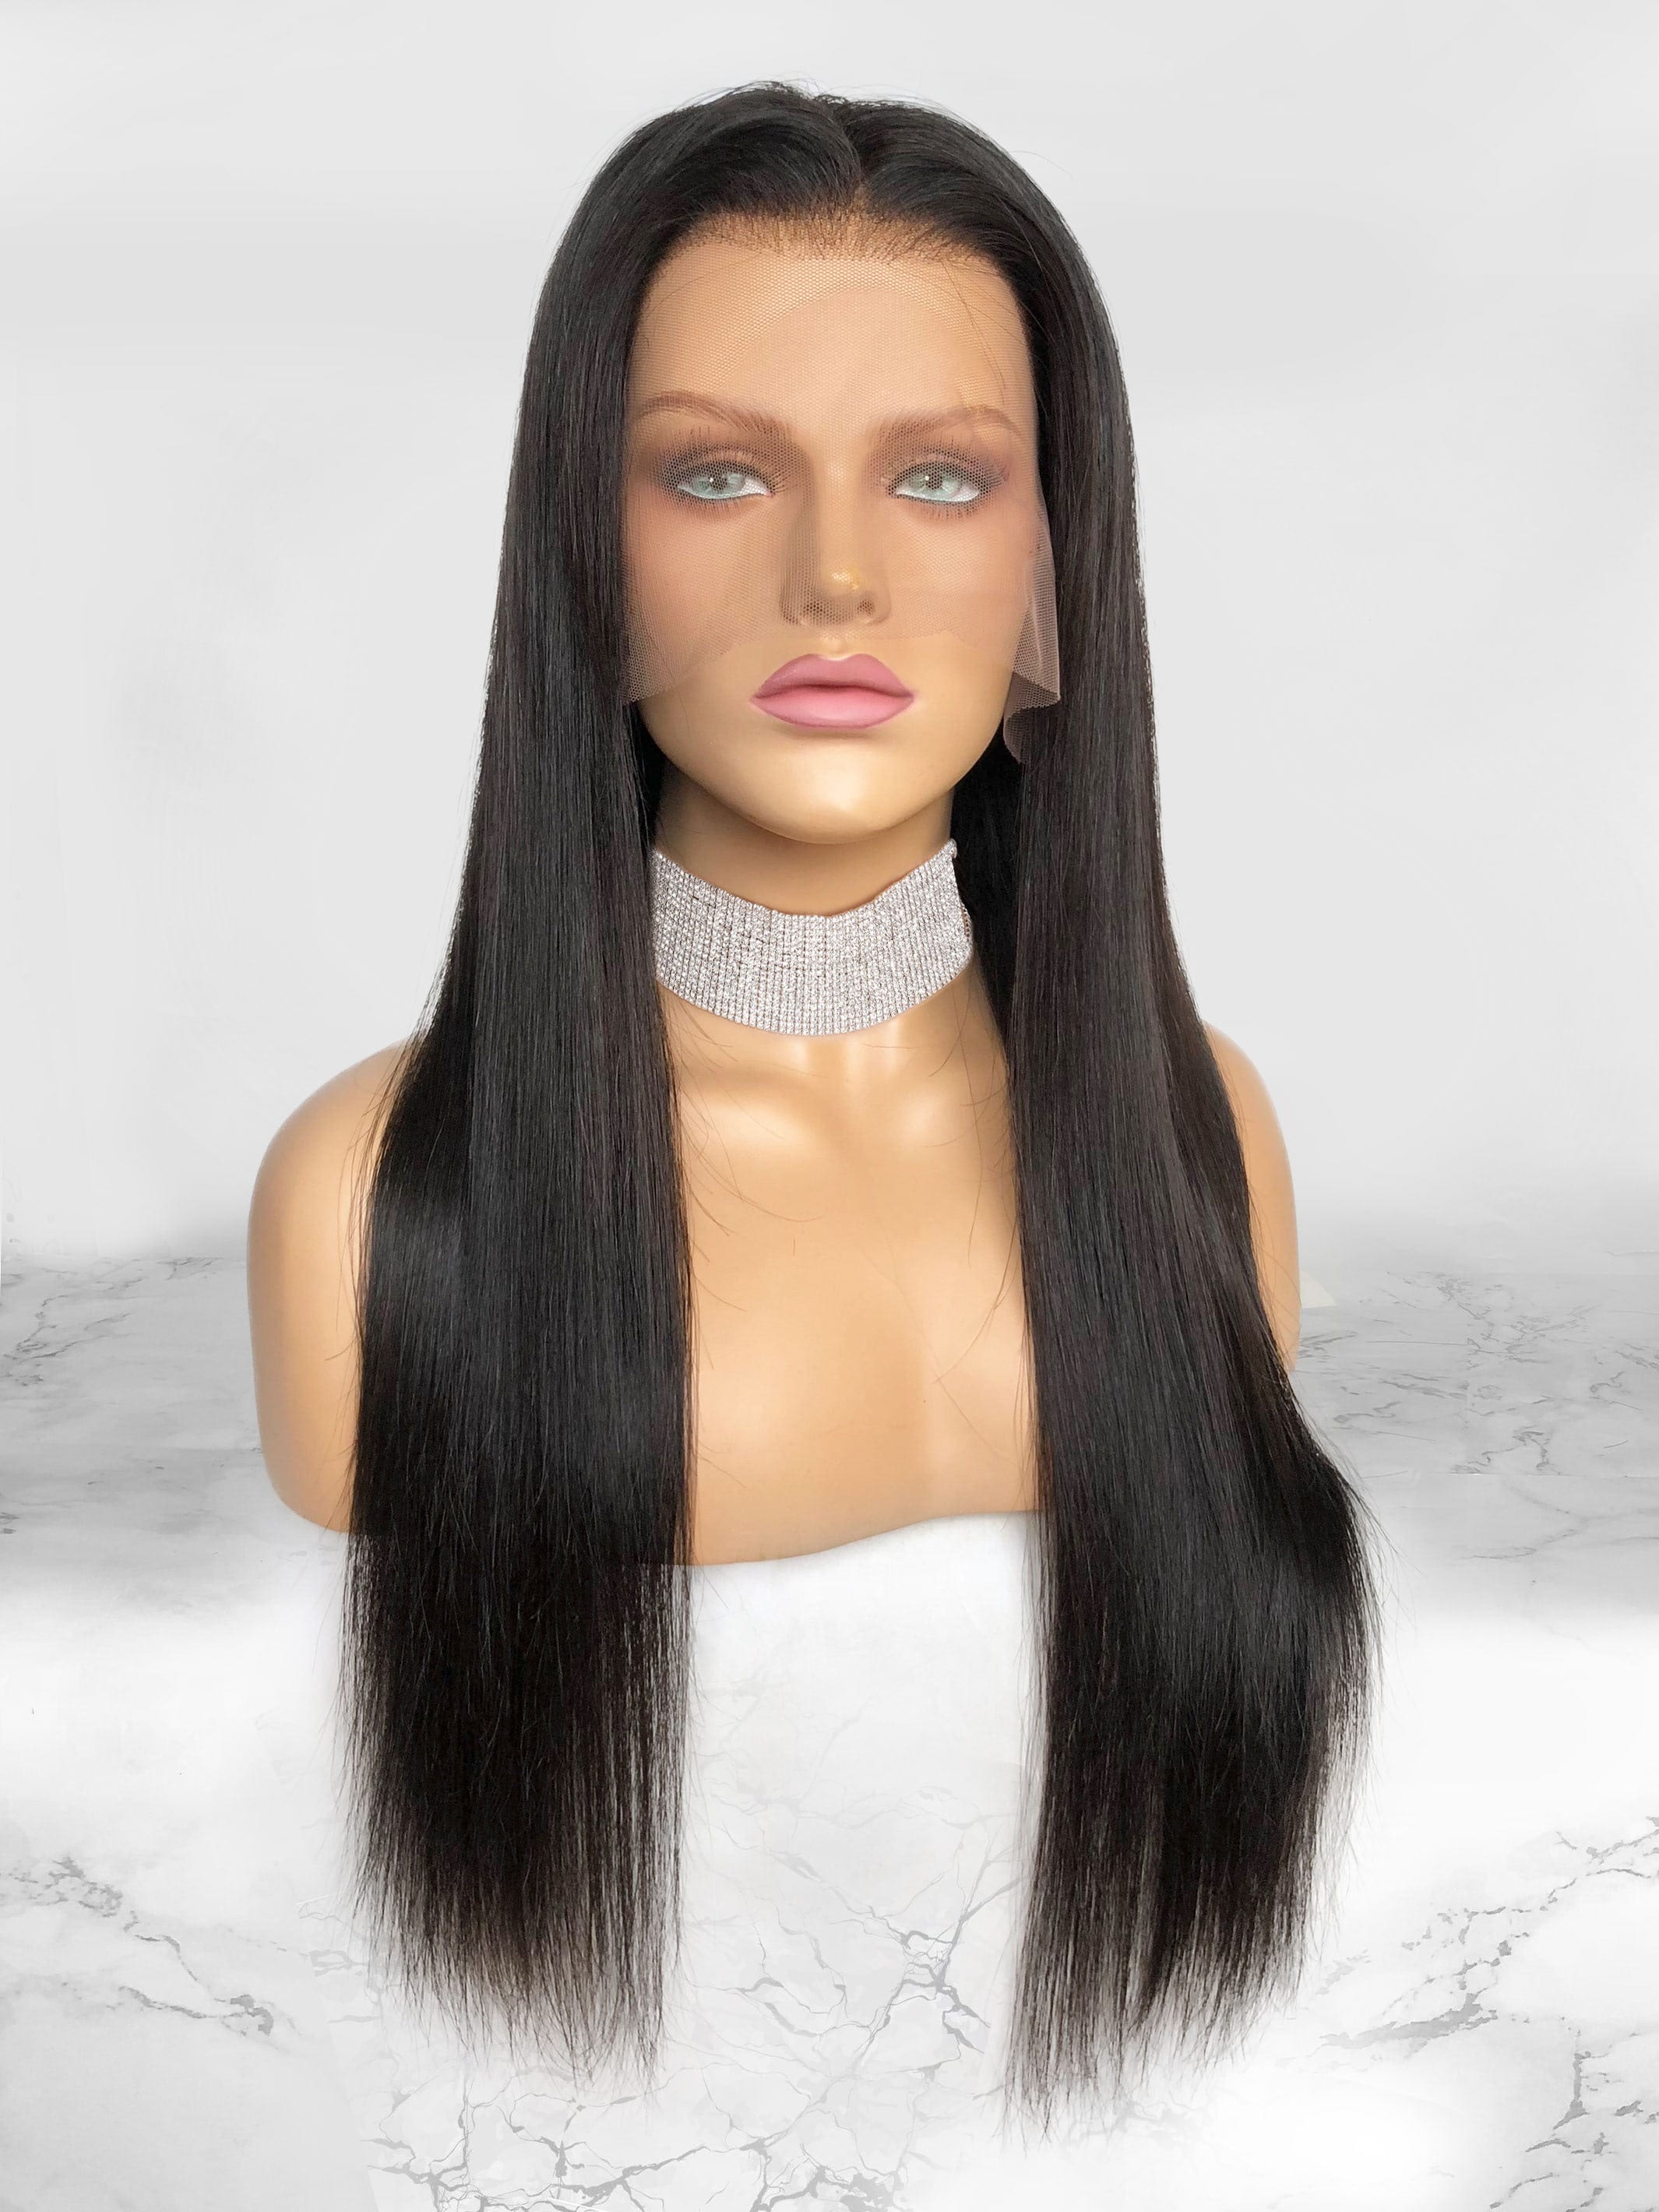 NO GLUE!! HOW TO SEW AN ELASTIC BAND TO A LACE FRONT WIG, NO MORE SLIDING  BACK